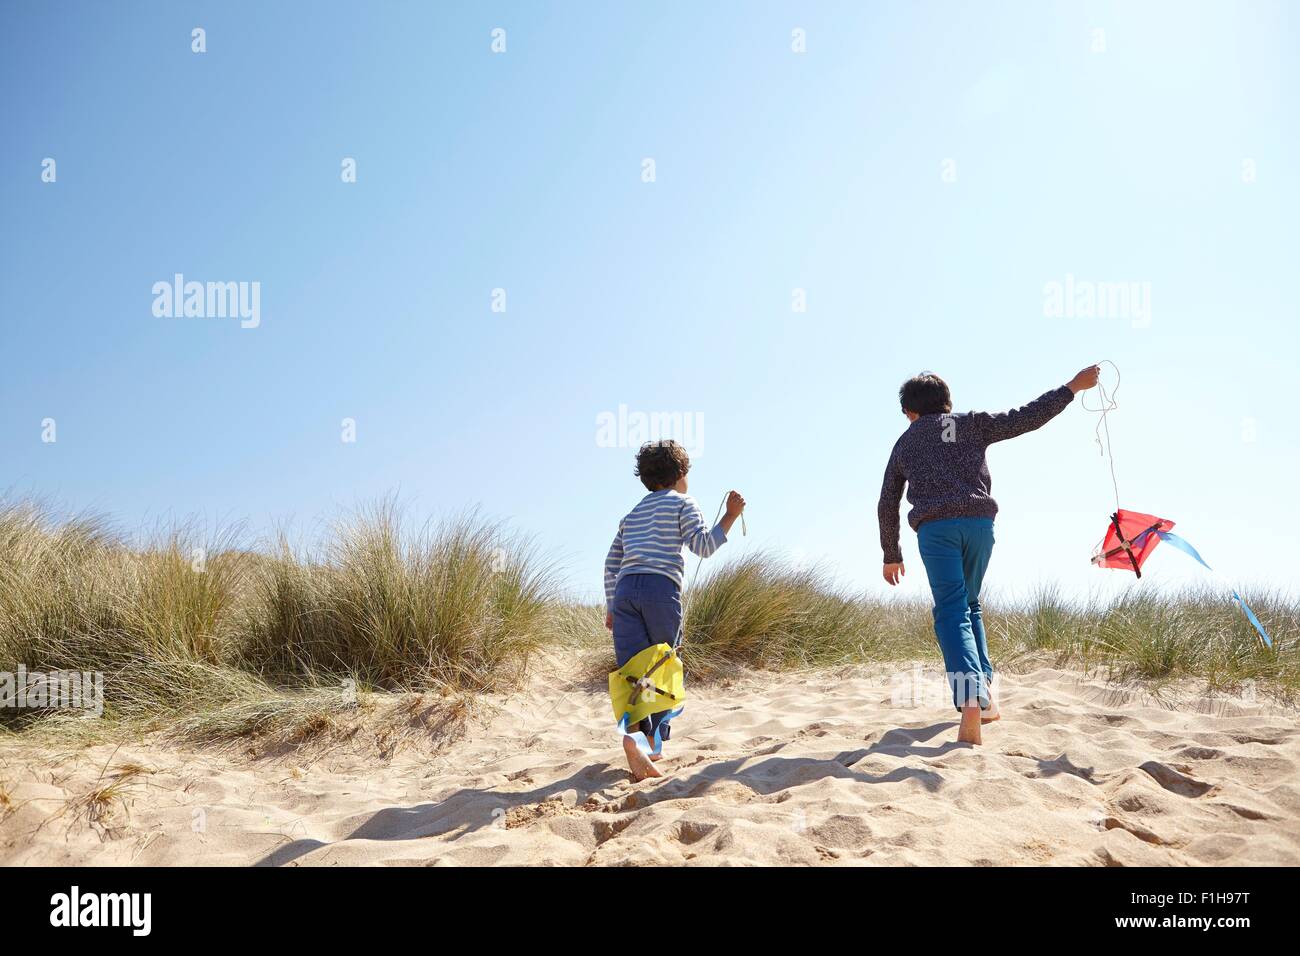 Two young boys, flying kites on beach Stock Photo